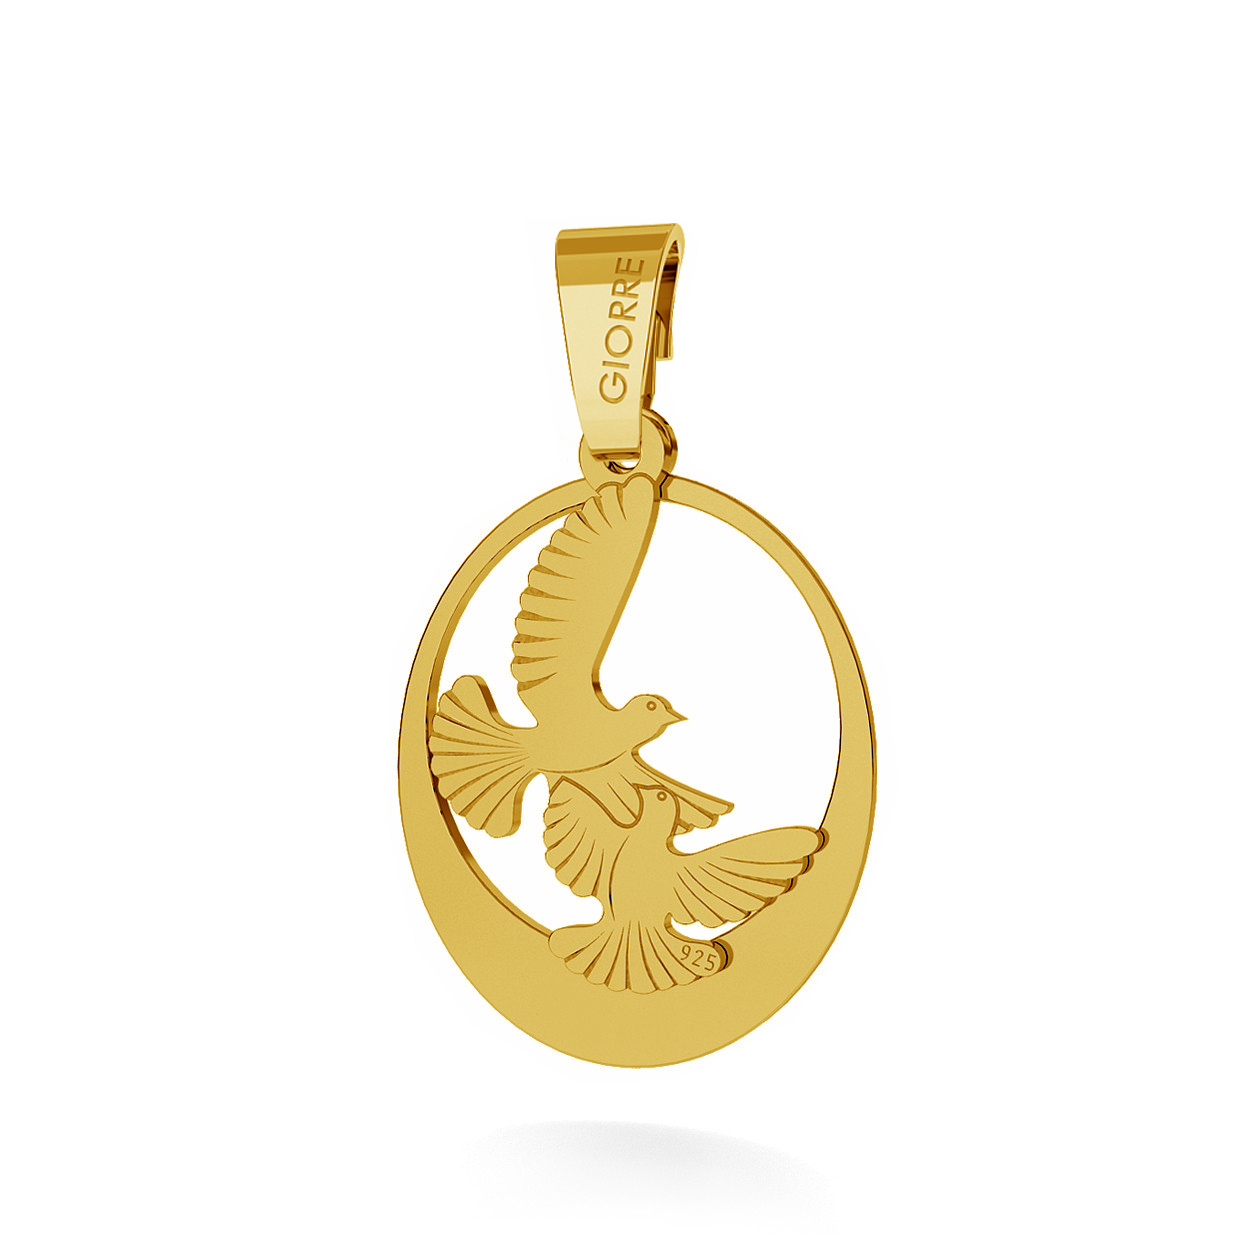 CHARM 123, TURTLEDOVE WITH ENGRAVE, STERLING SILVER (925) RHODIUM OR GOLD PLATED